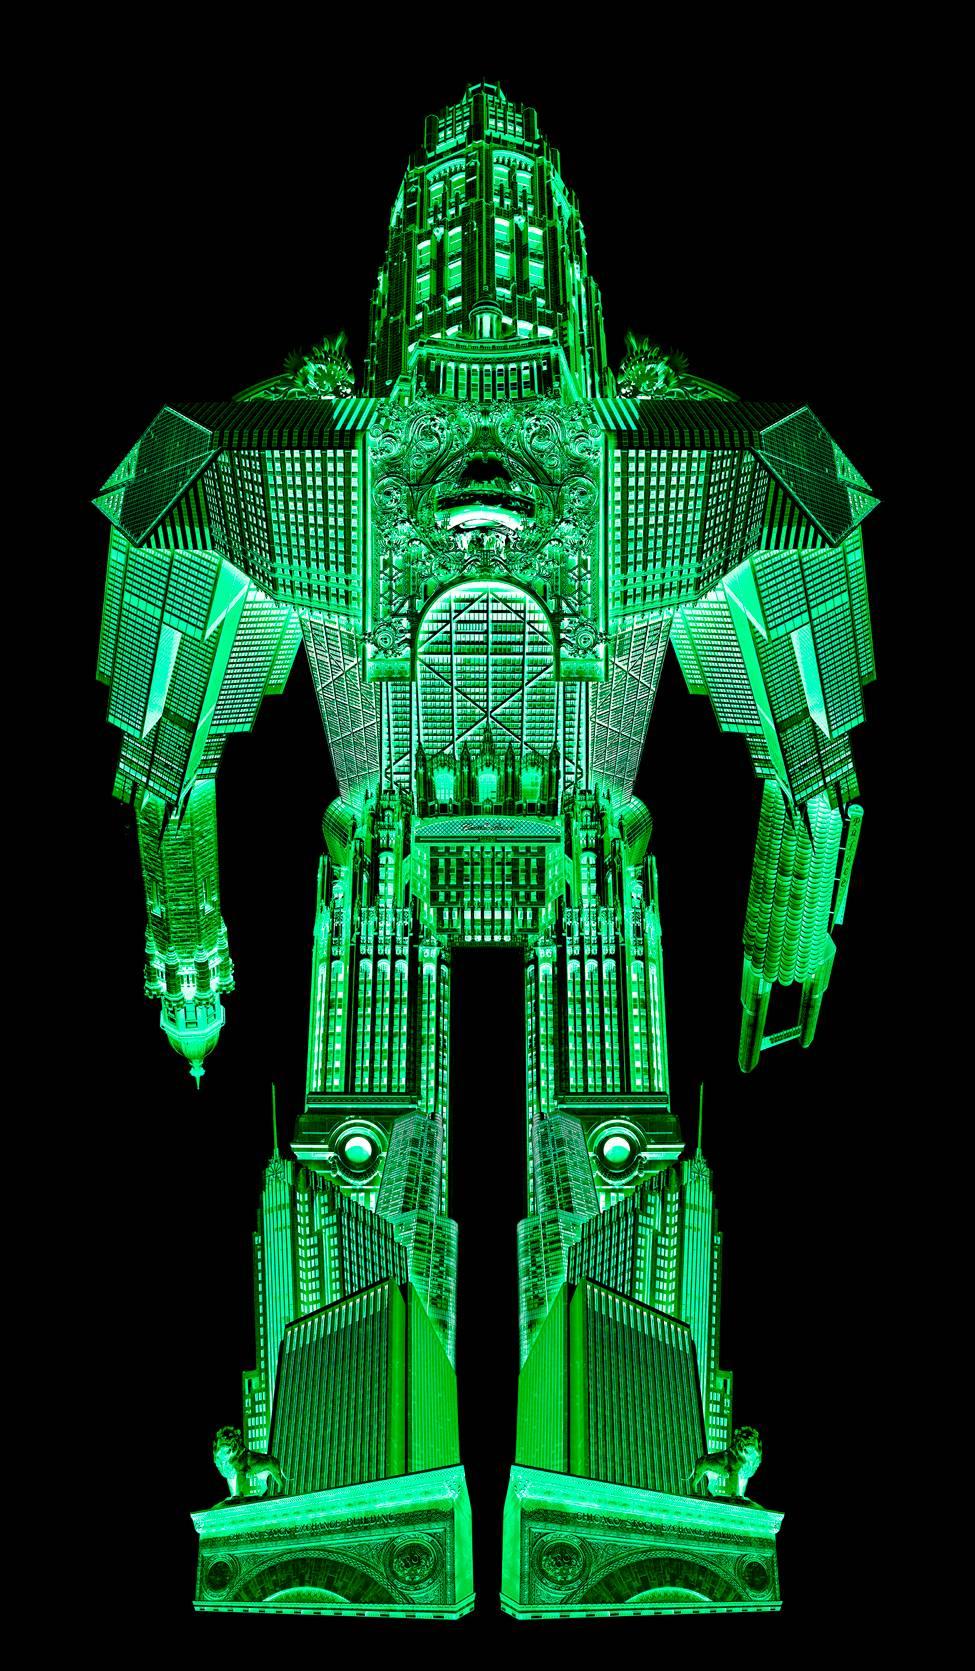 Joel Kuntz Color Photograph - Robot created with Chicago buildings, green robot on black background